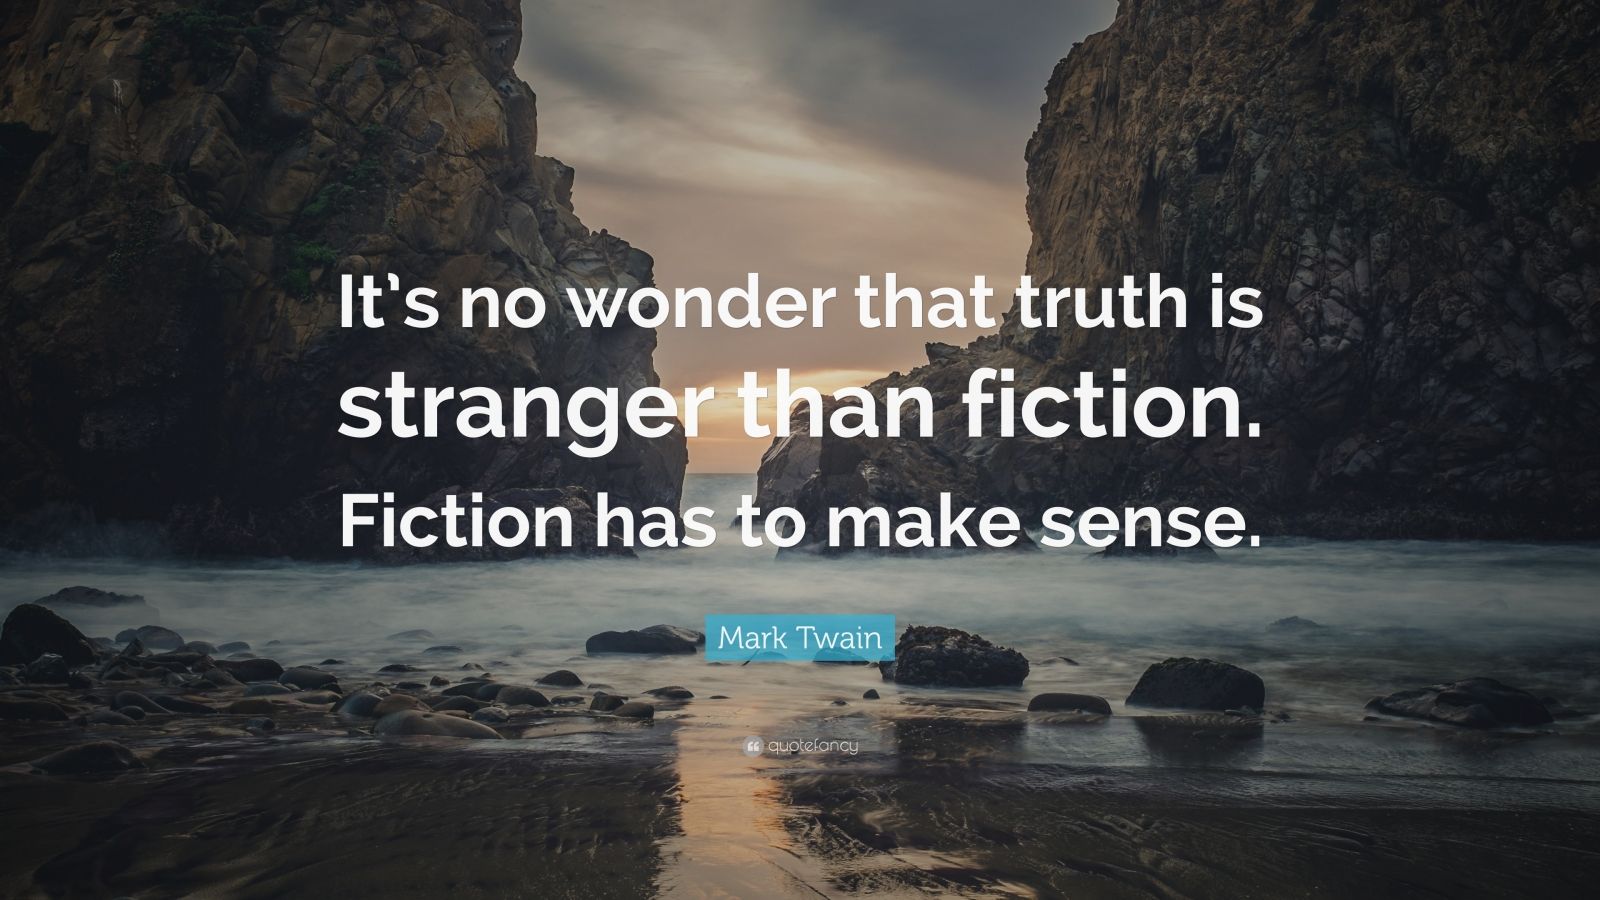 essay on truth is stranger than fiction